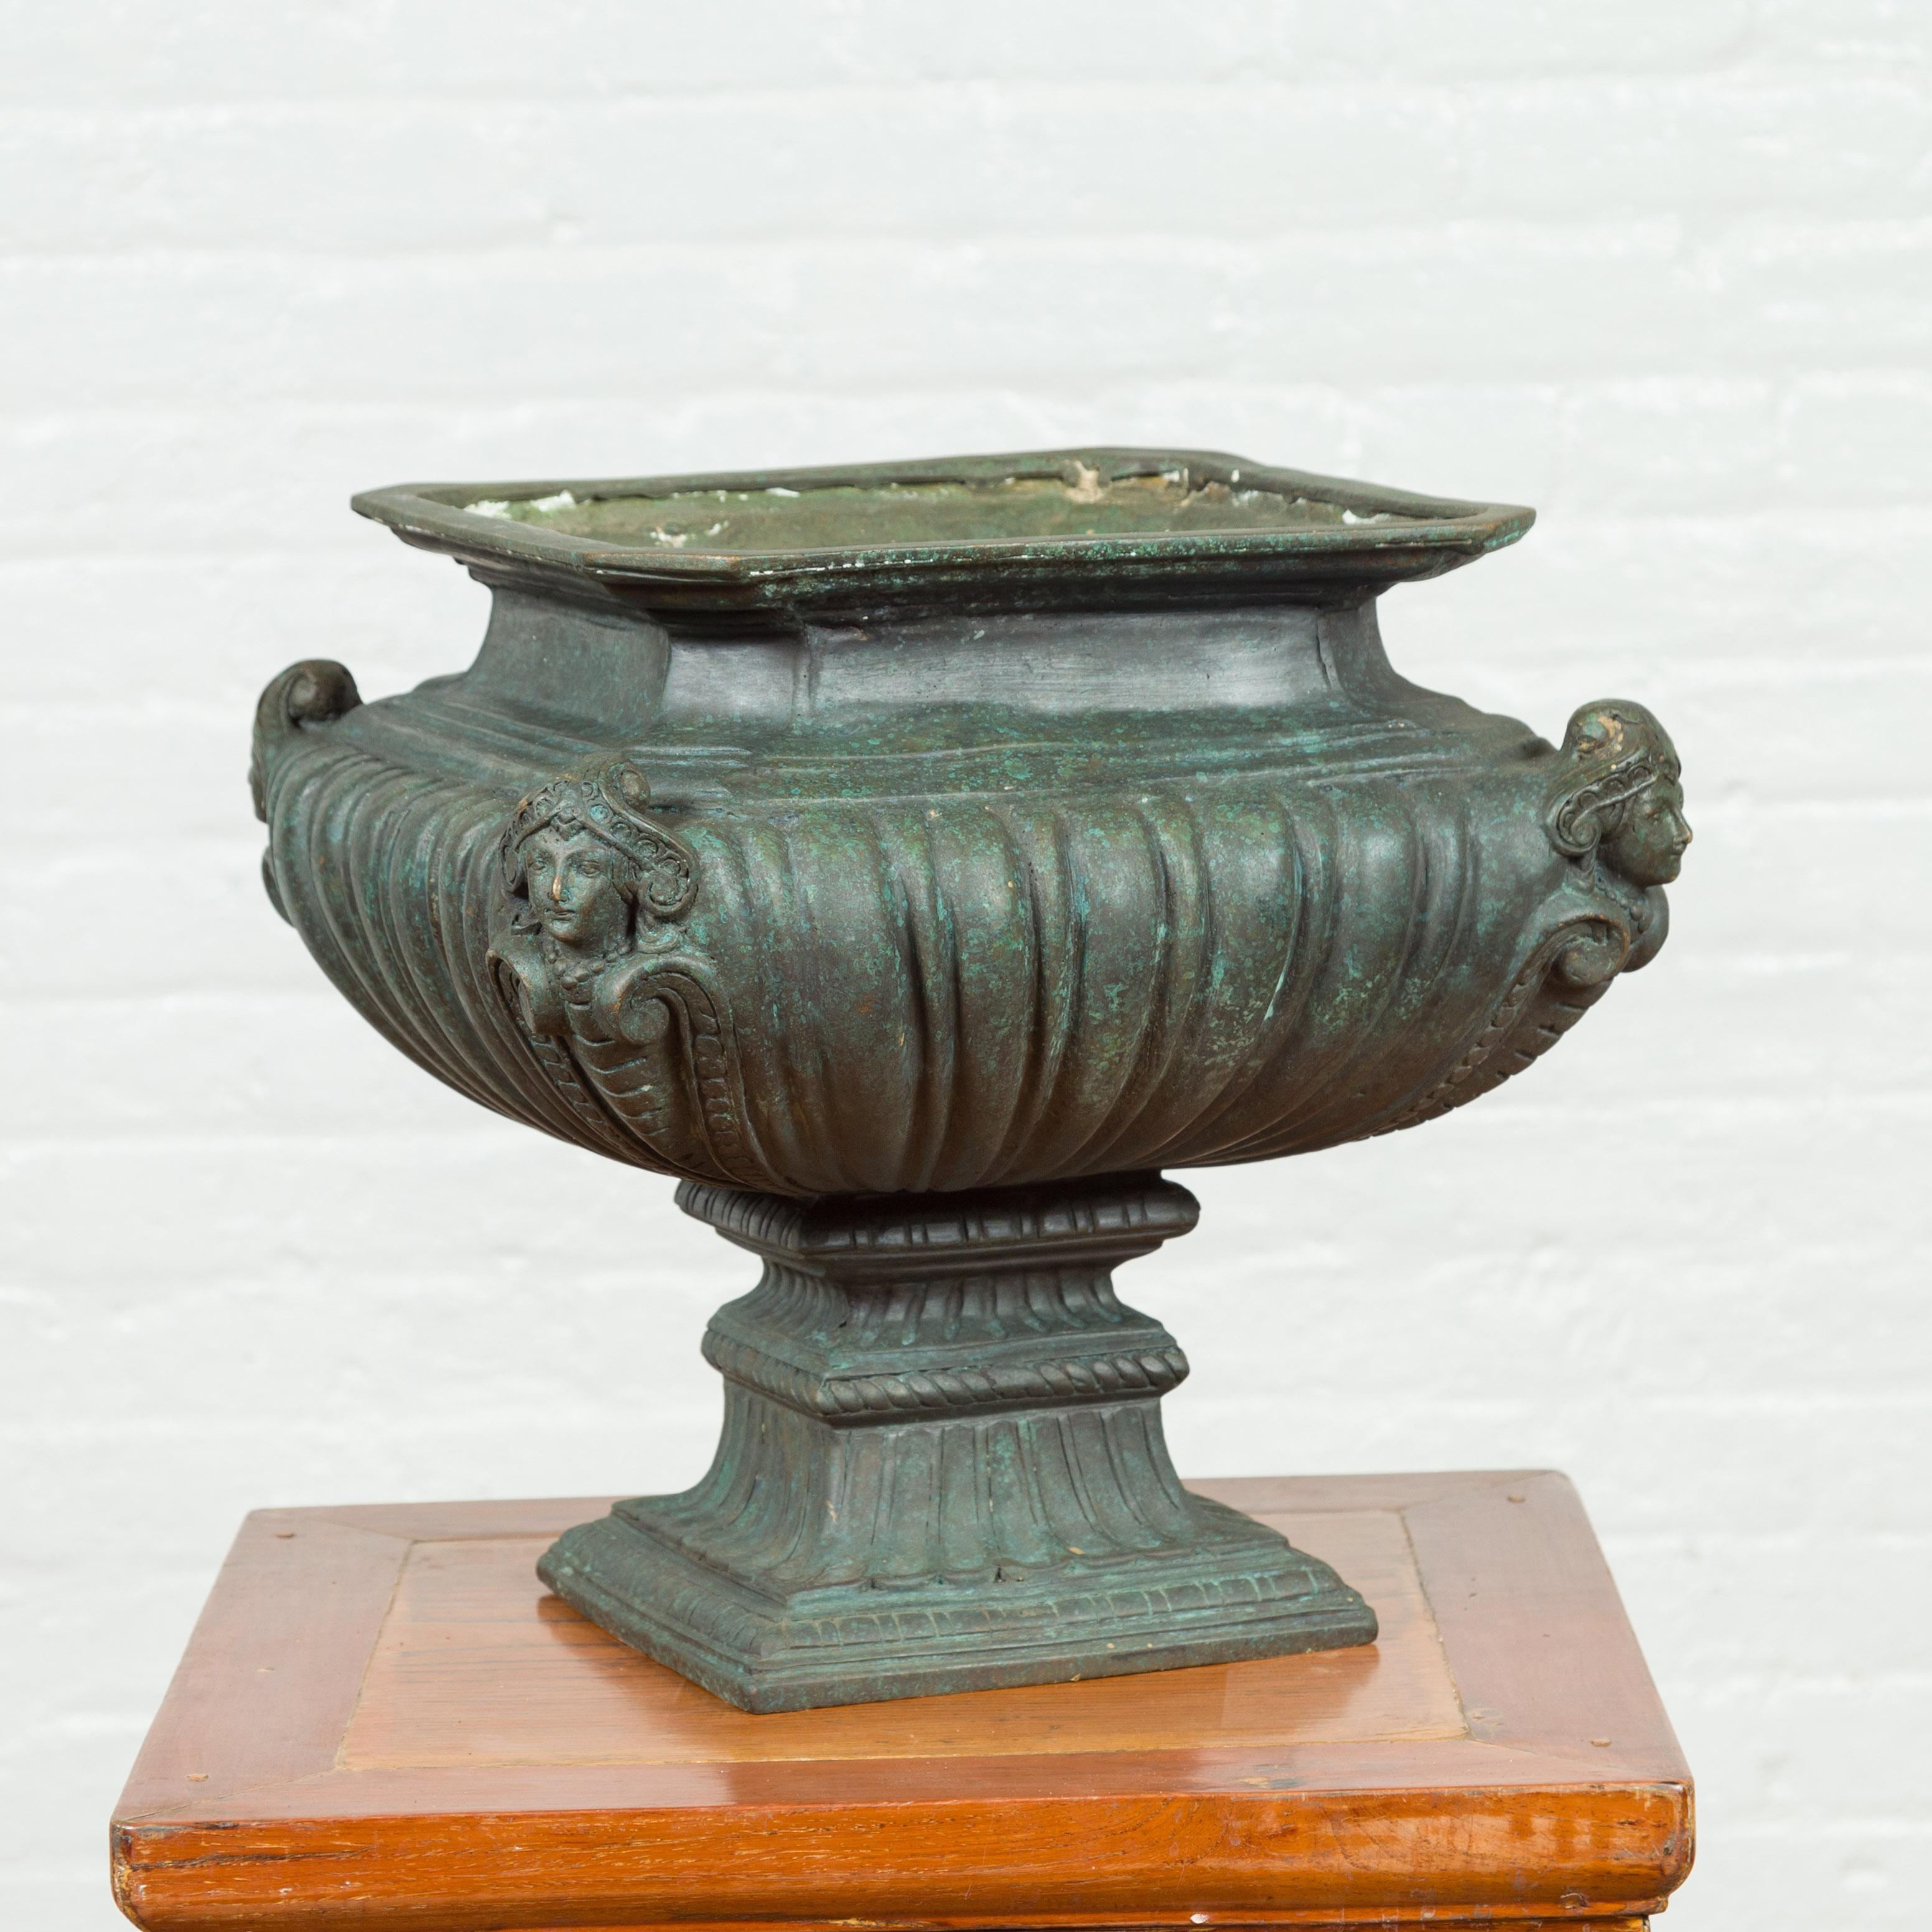 Contemporary Cast Bronze Planter with Figures, Gadroon Motifs and Verde Patina For Sale 6